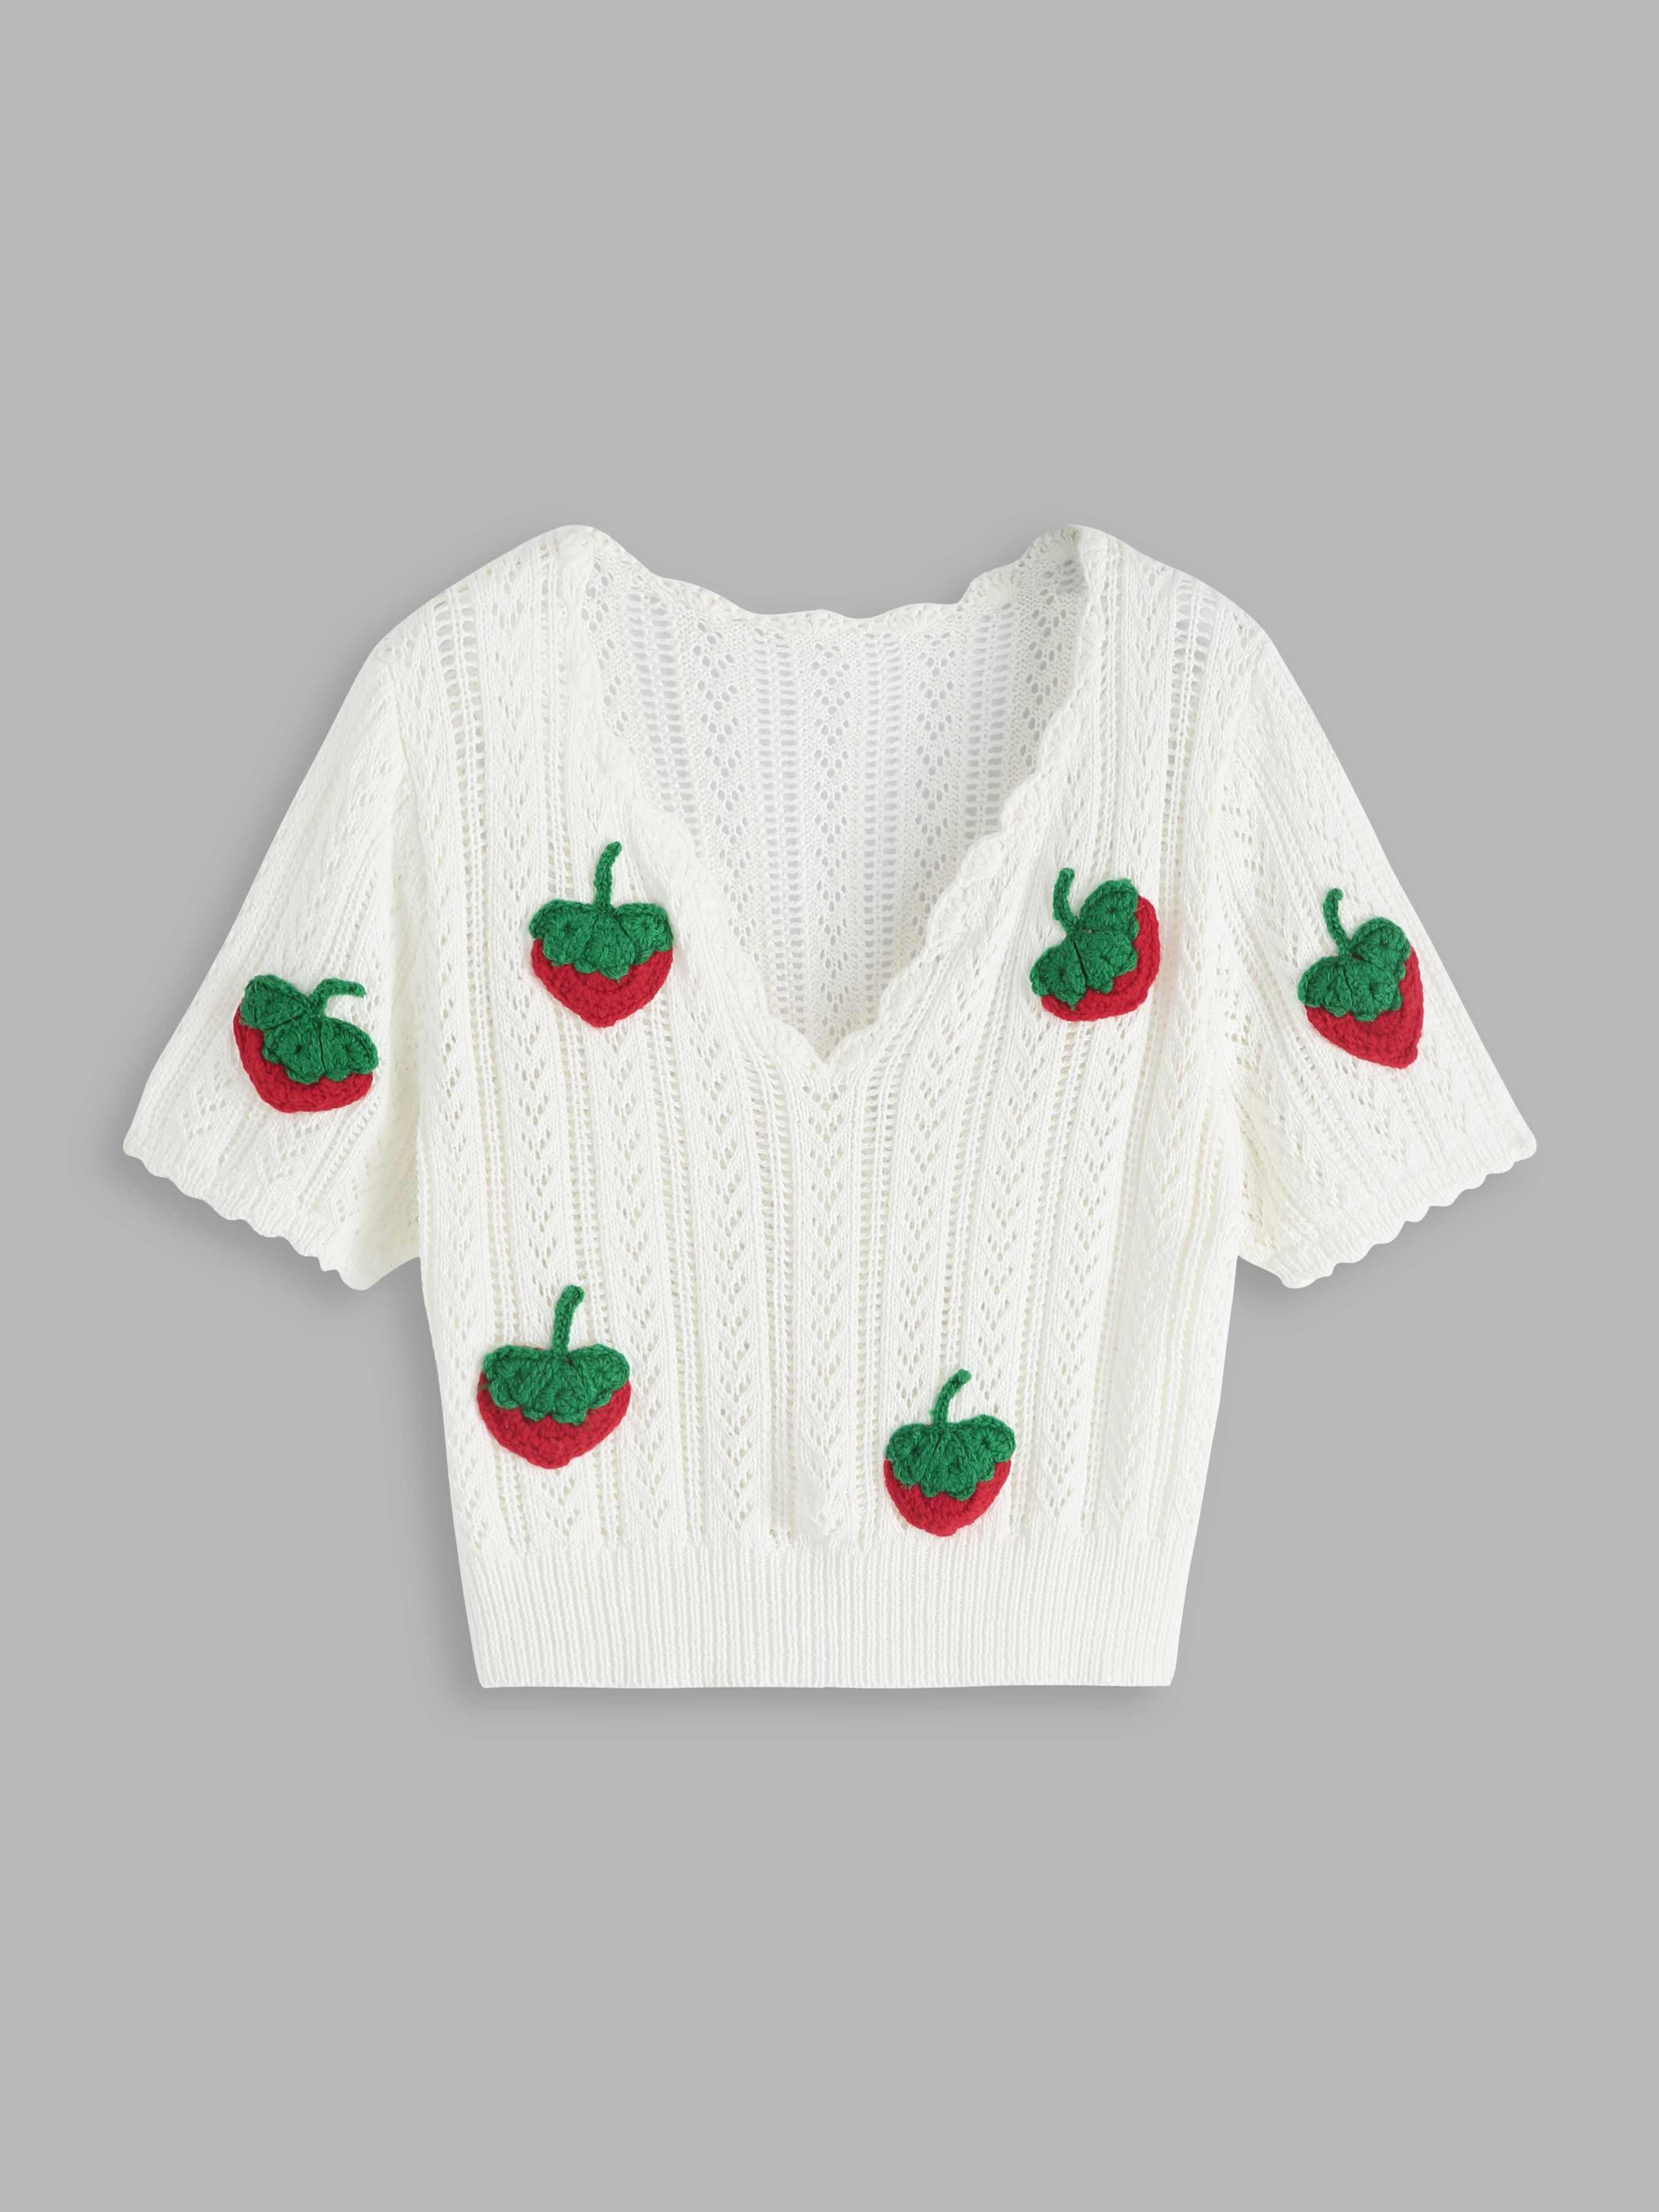 Strawberry Hollow Out Knit Top